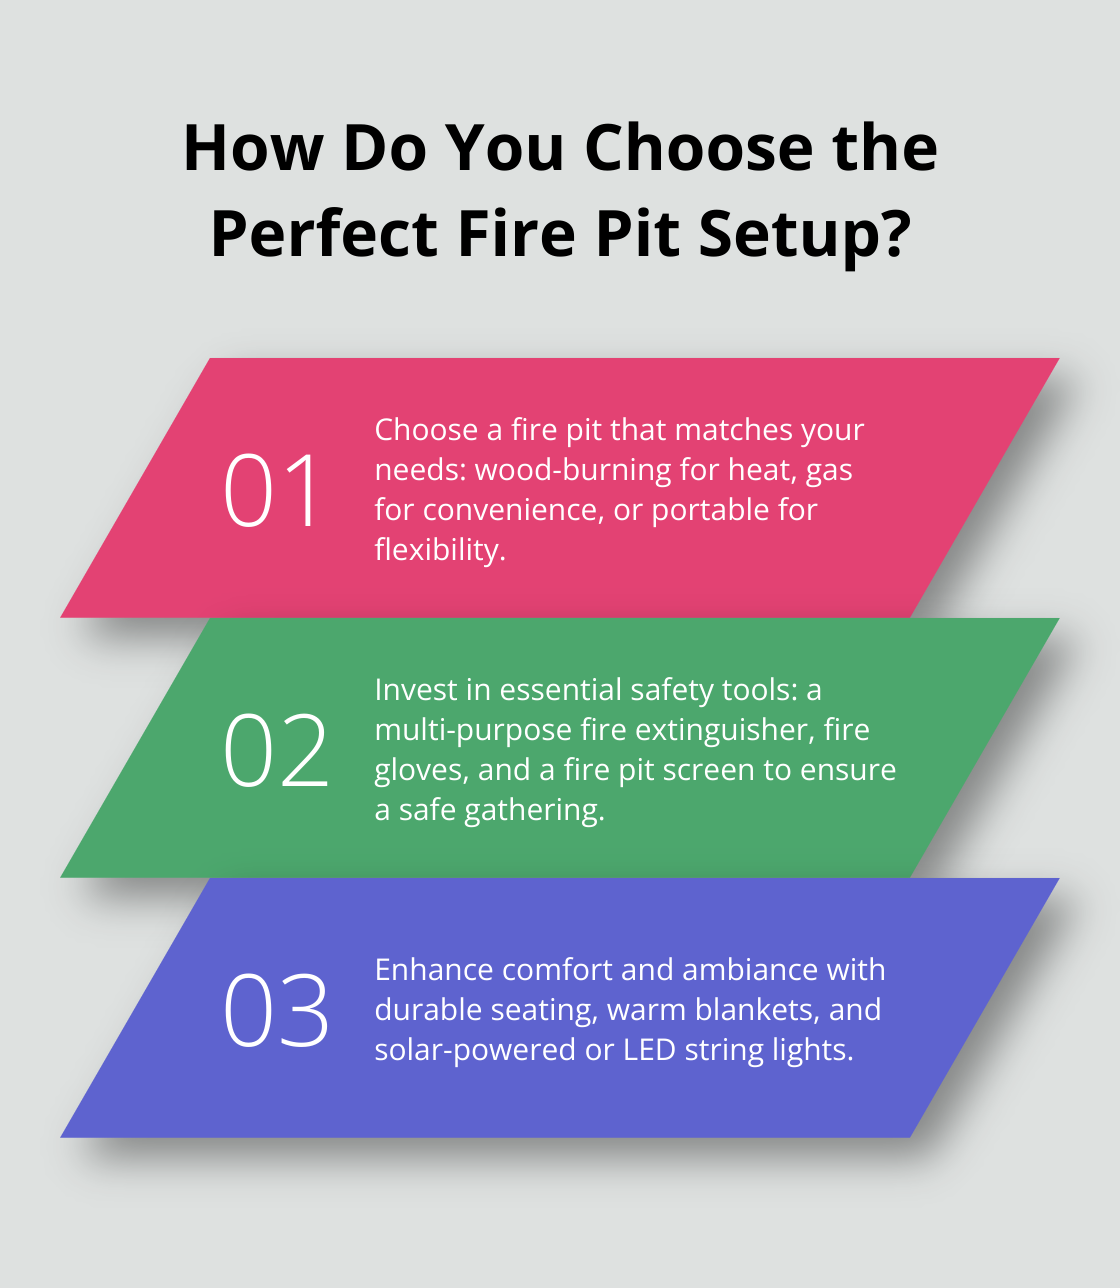 Fact - How Do You Choose the Perfect Fire Pit Setup?